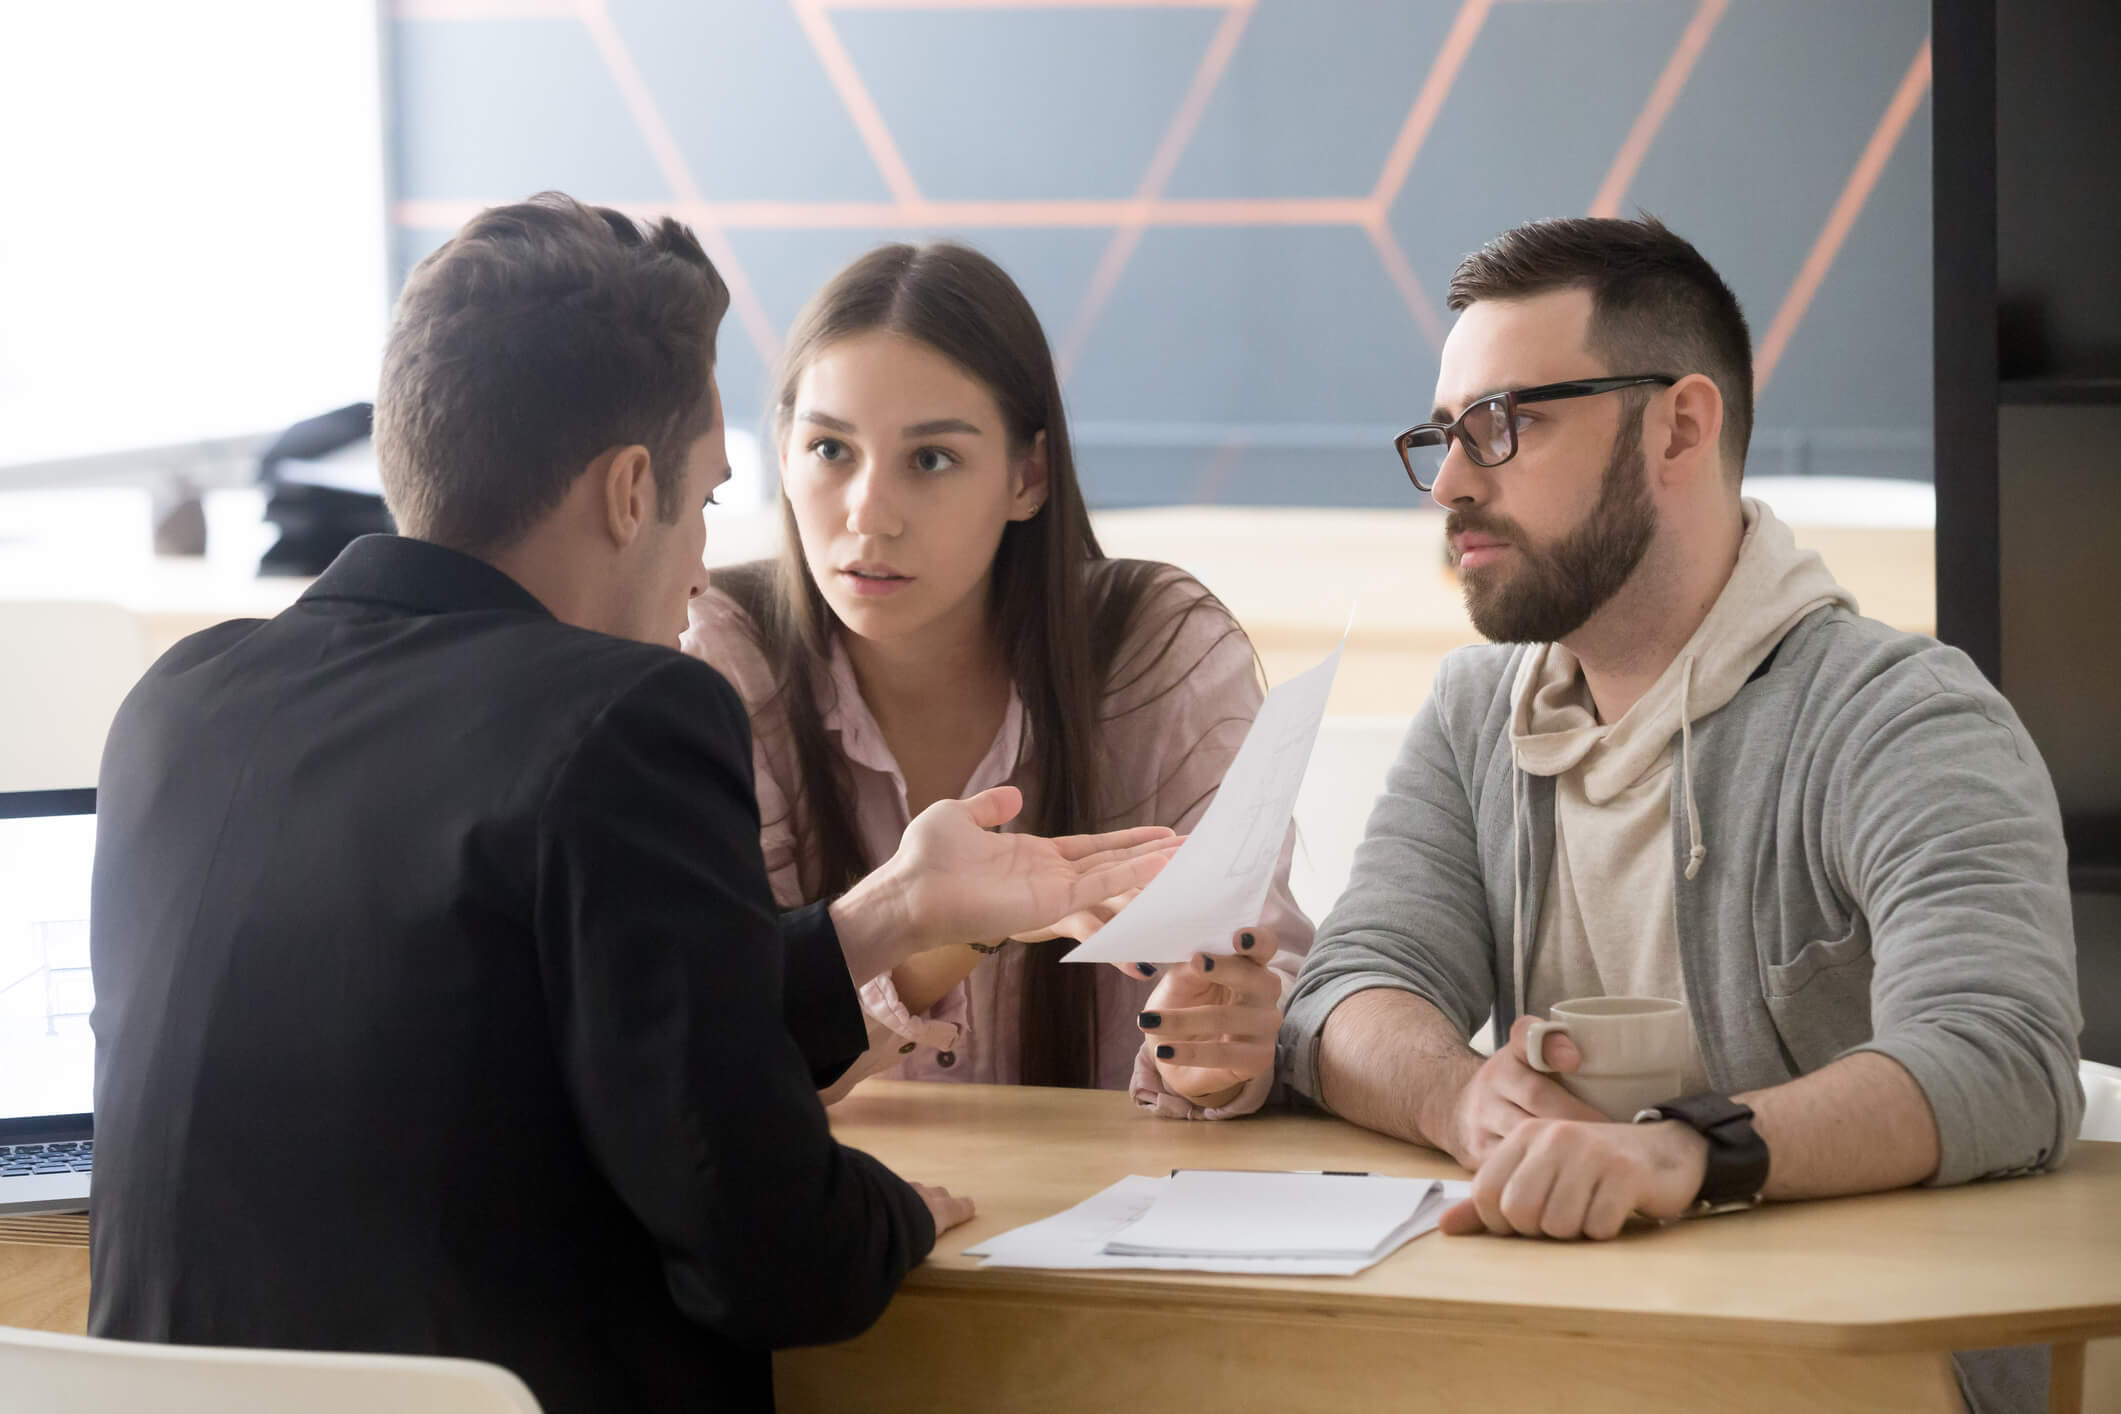 Angry millennial couple complaining having claims about bad contract terms disputing at meeting with lawyer, deceived dissatisfied customers demanding compensation, legal fight and fraud concept